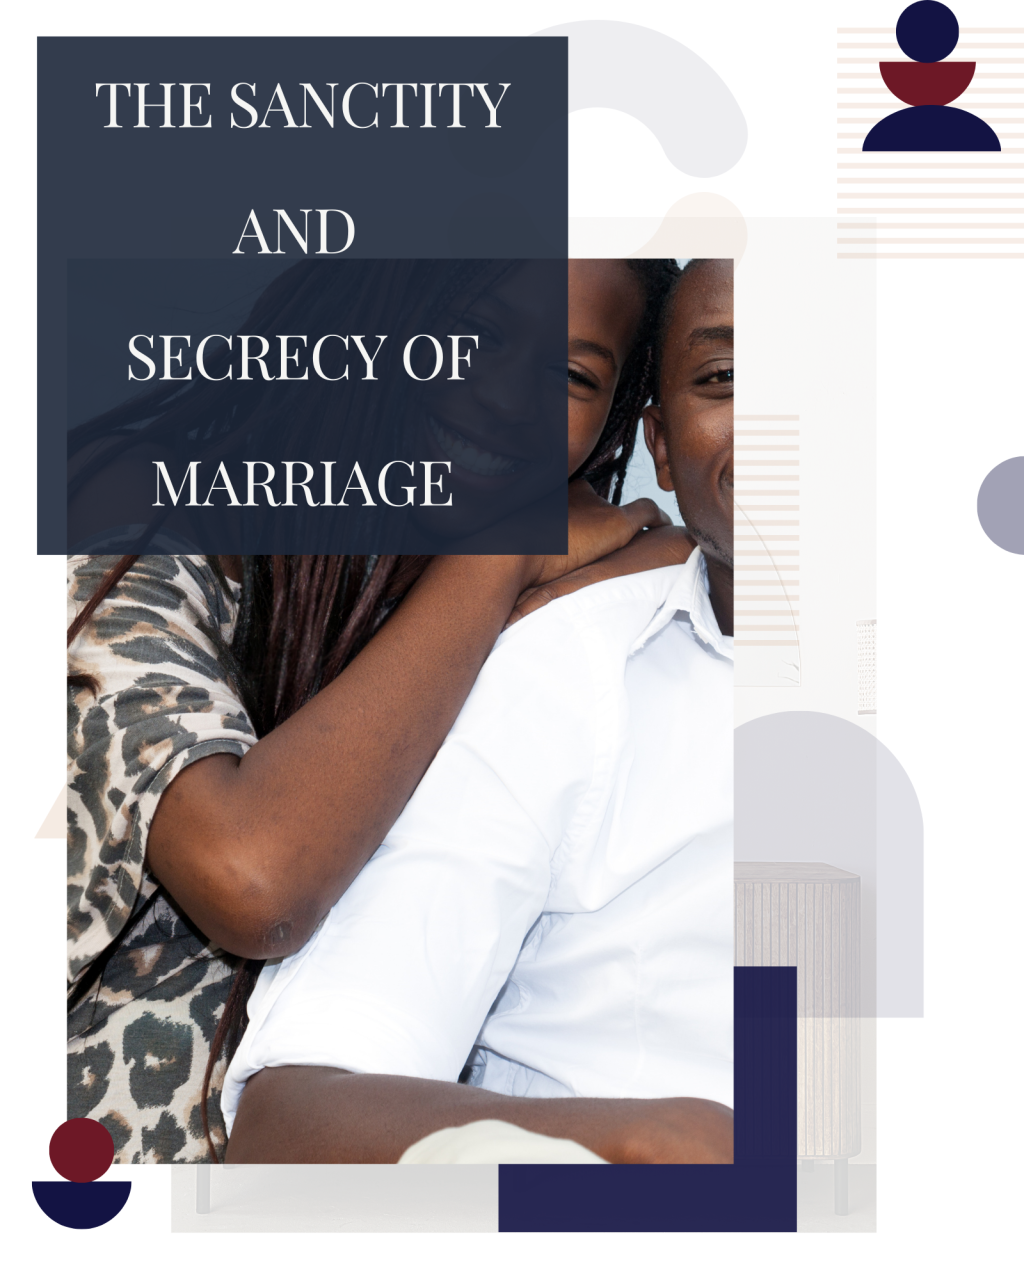 THE SANCTITY AND SECRECY OF MARRIAGE